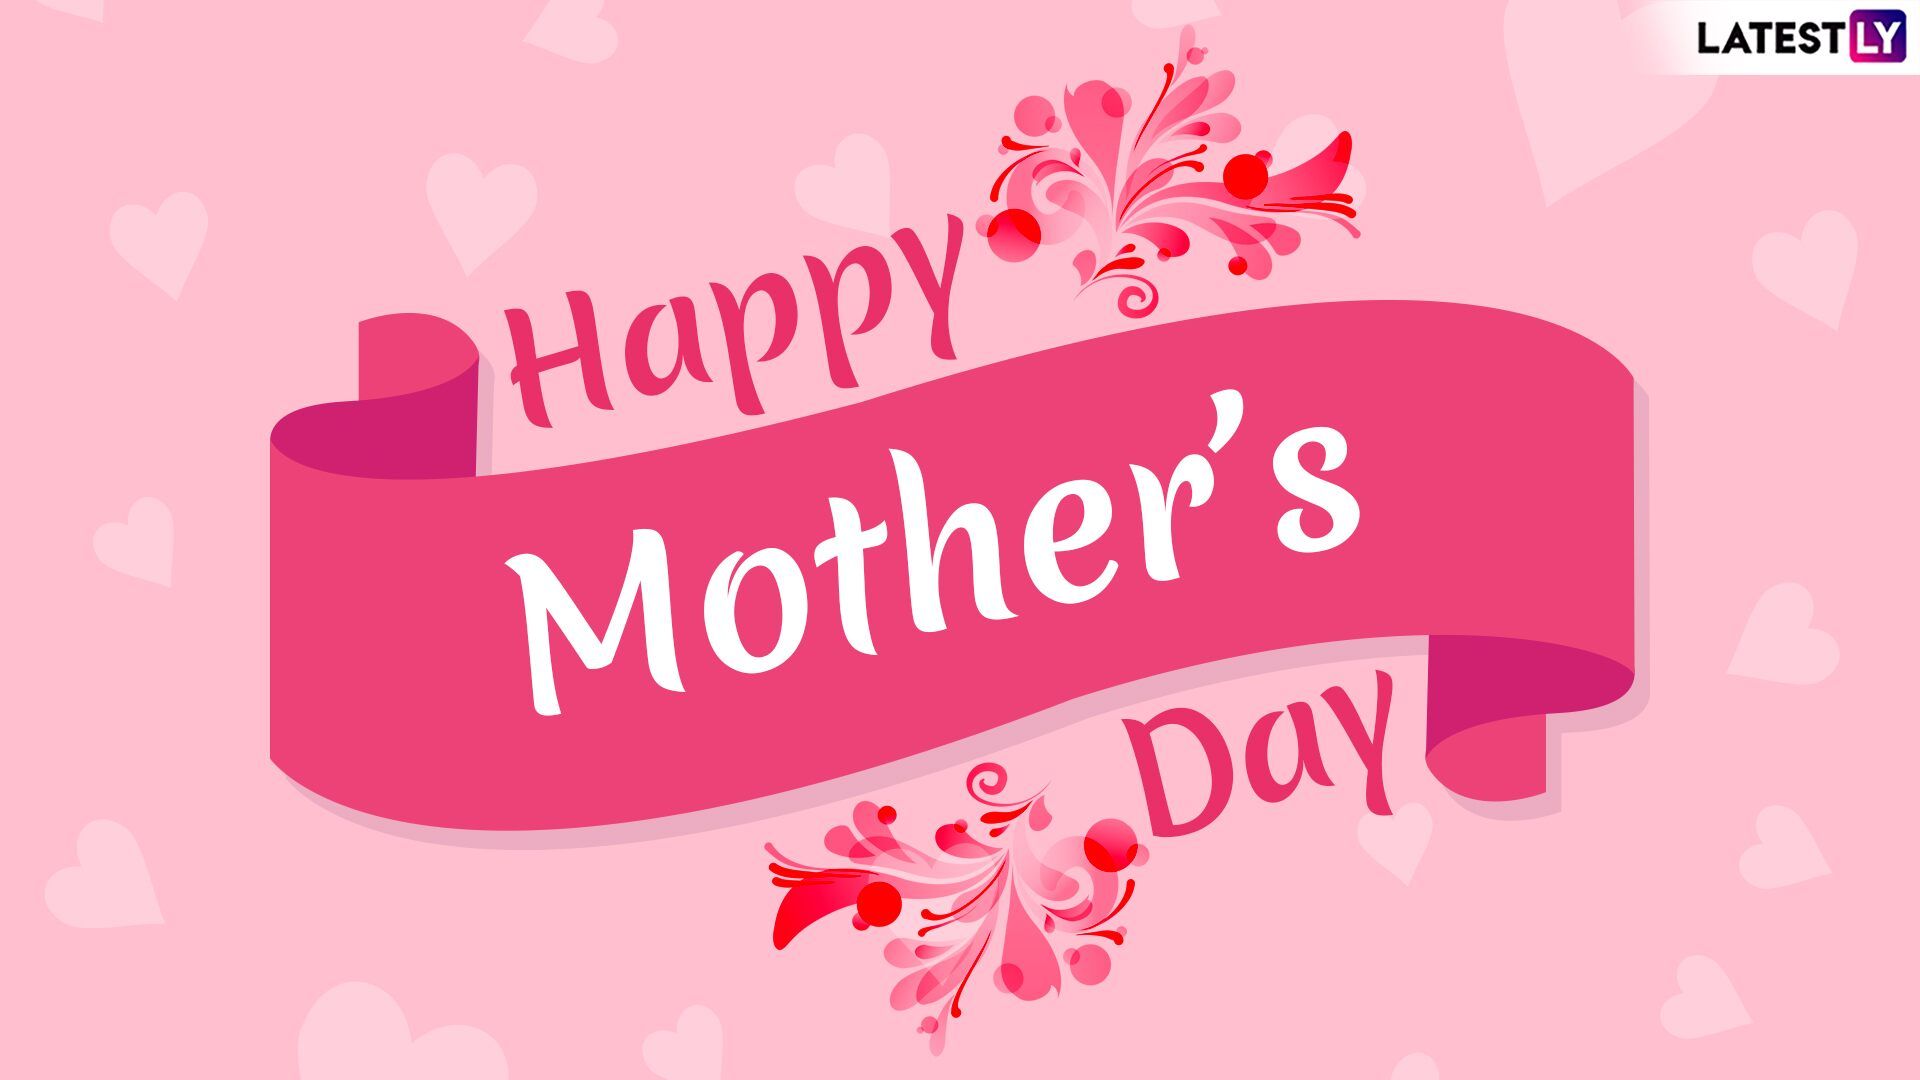 Happy Mother's Day HD Wallpaper Free Happy Mother's Day HD Background